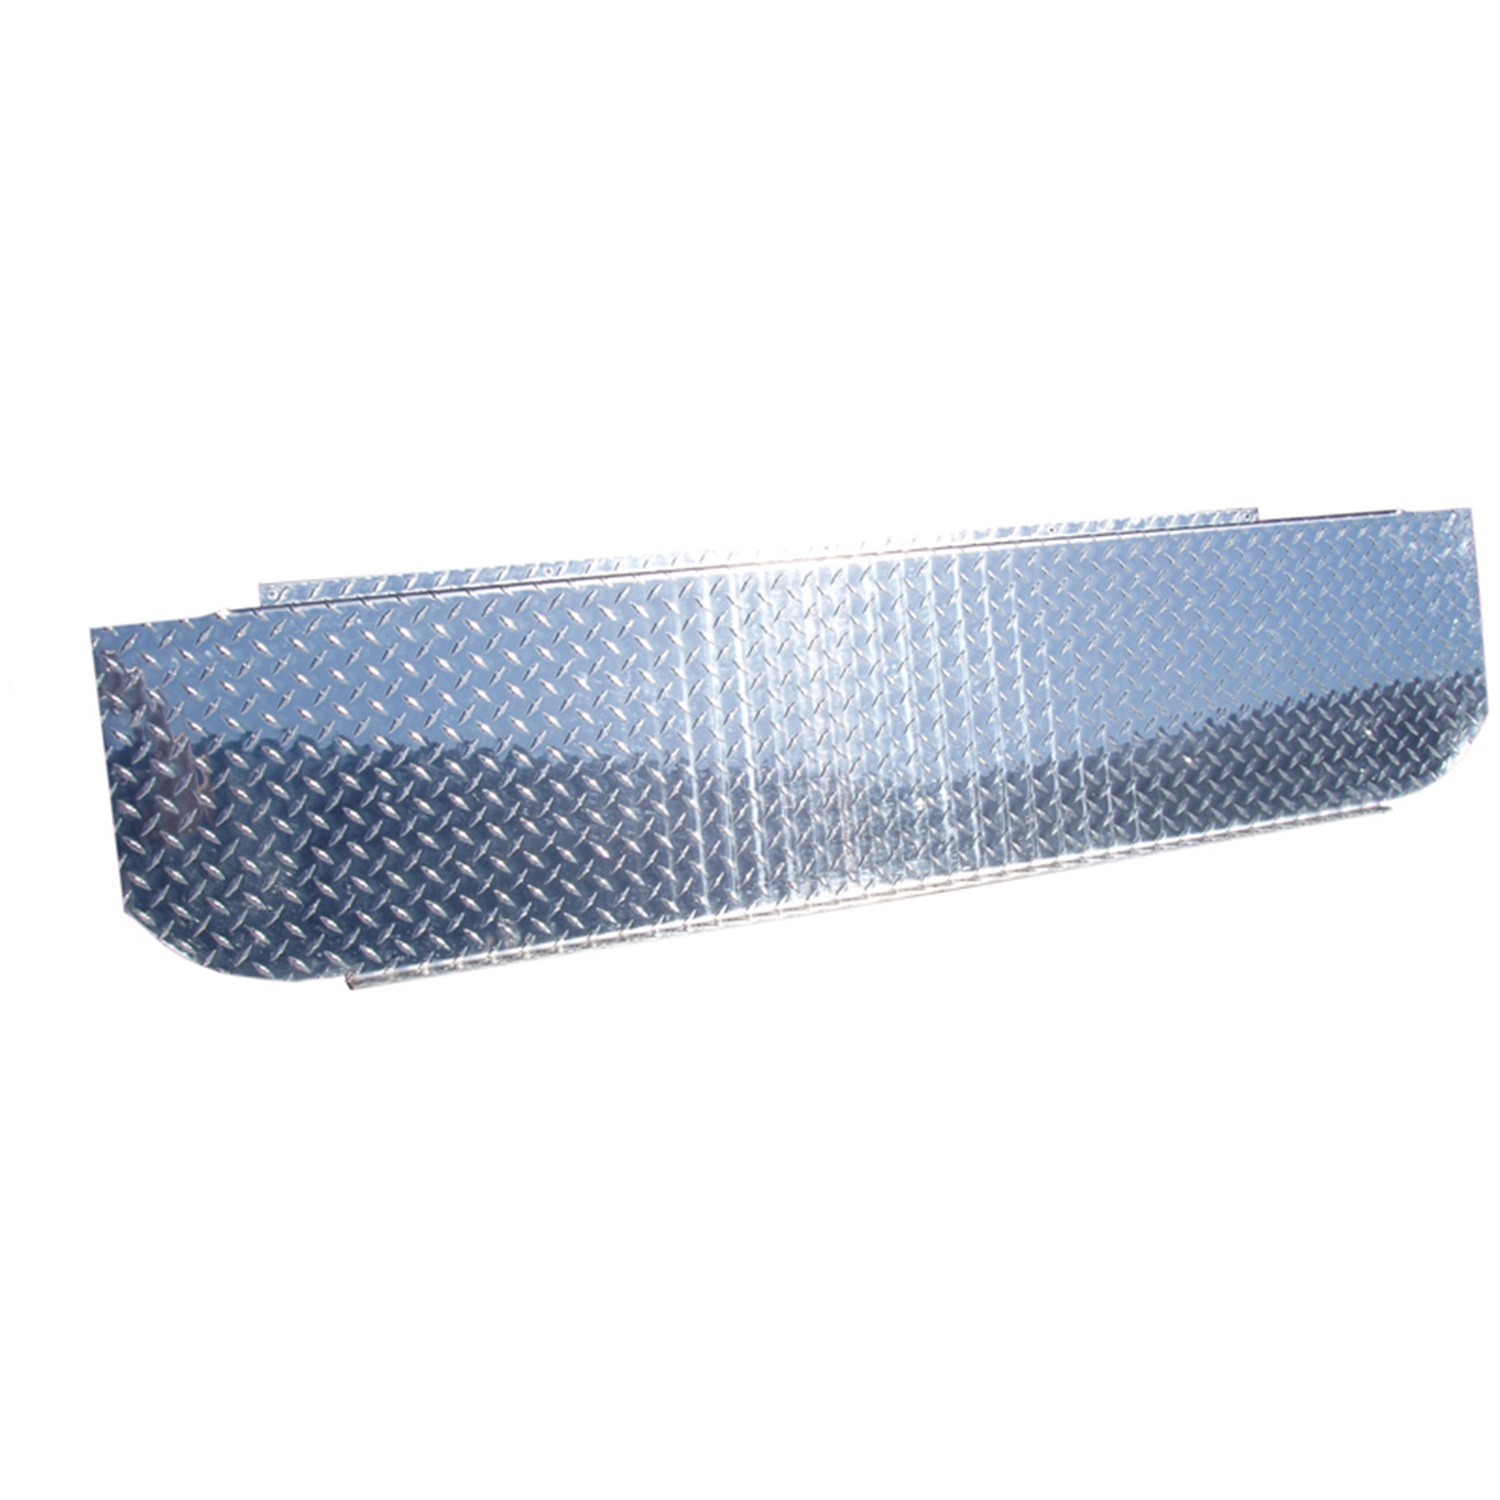 MBRP Exhaust MBRP Exhaust BB0003 Smokers; Checker Plate Exhaust Stack Cover